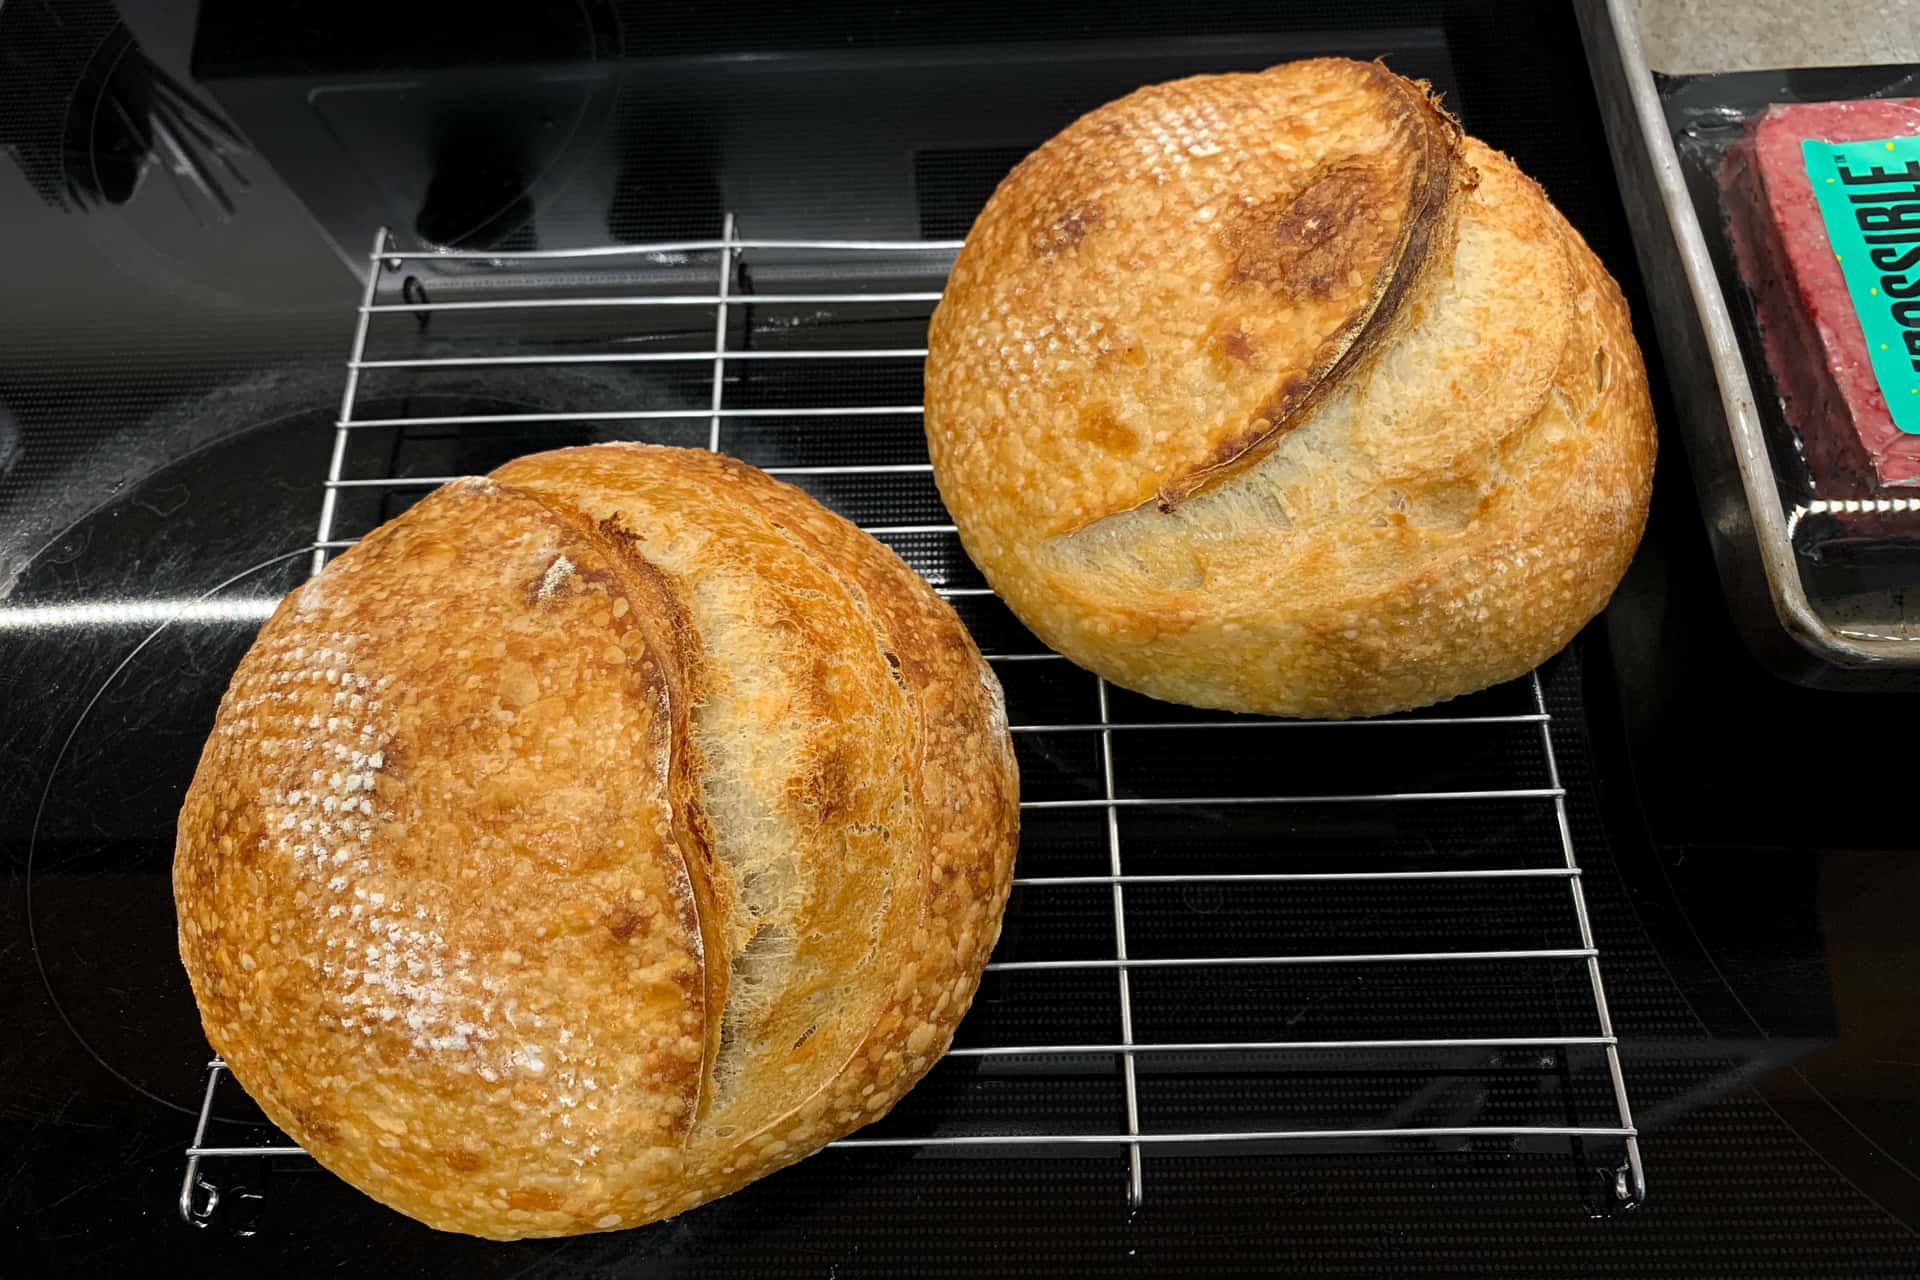 homemade sourdough bread loaves and a retail package of Impossible Burger